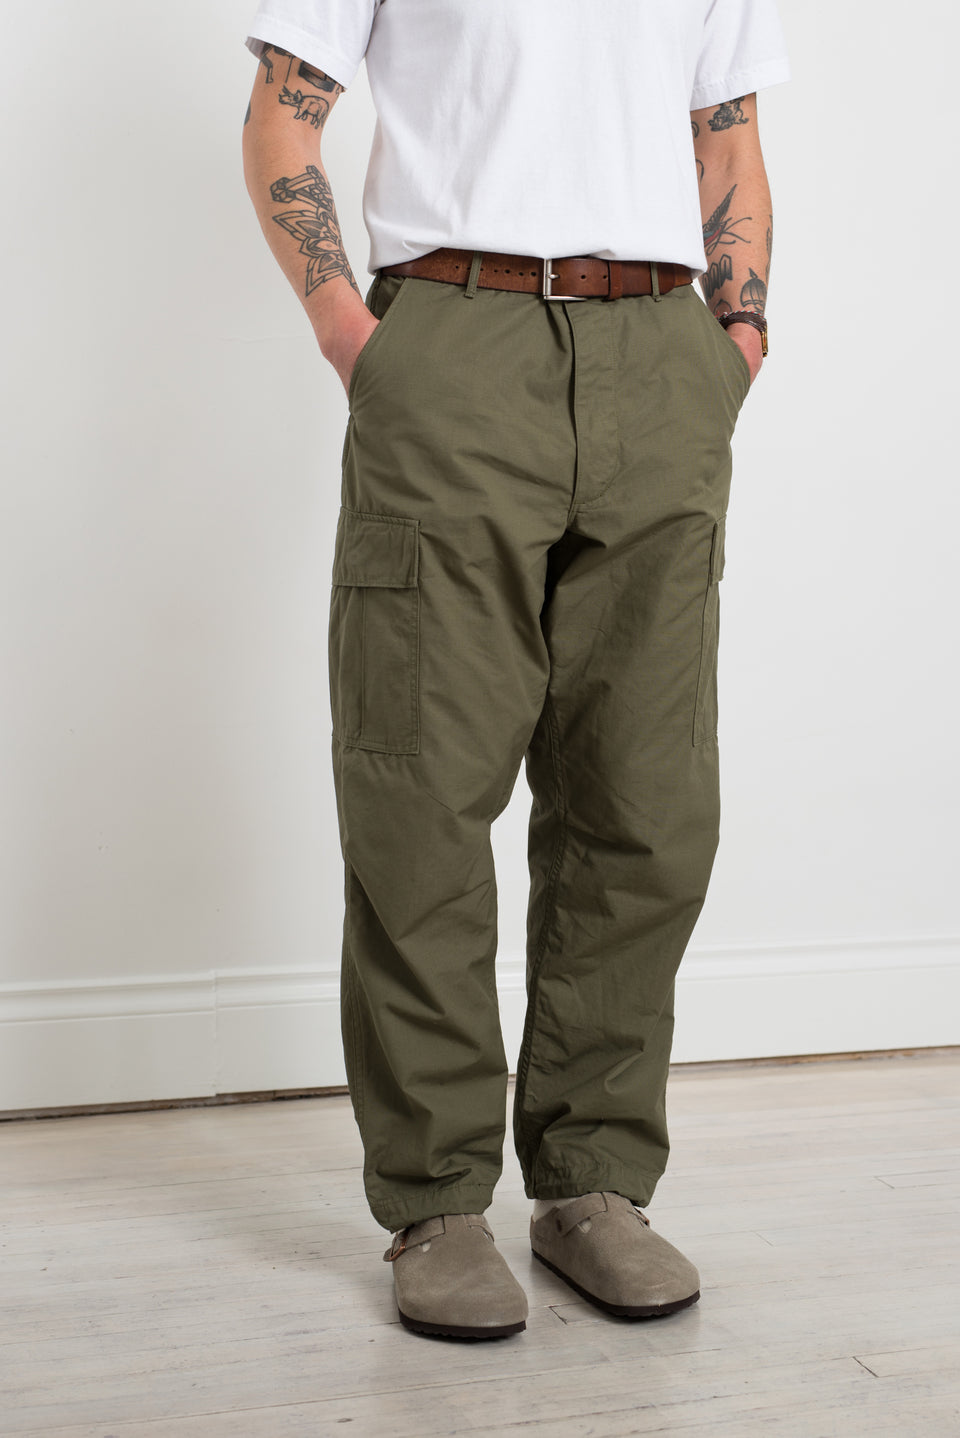 Fashion (army Green)Khaki Casual Pants Men Joggers Army-Green Cargo Pants  Multi-Pocket Fashions Black Trousers Of Man OM @ Best Price Online | Jumia  Egypt